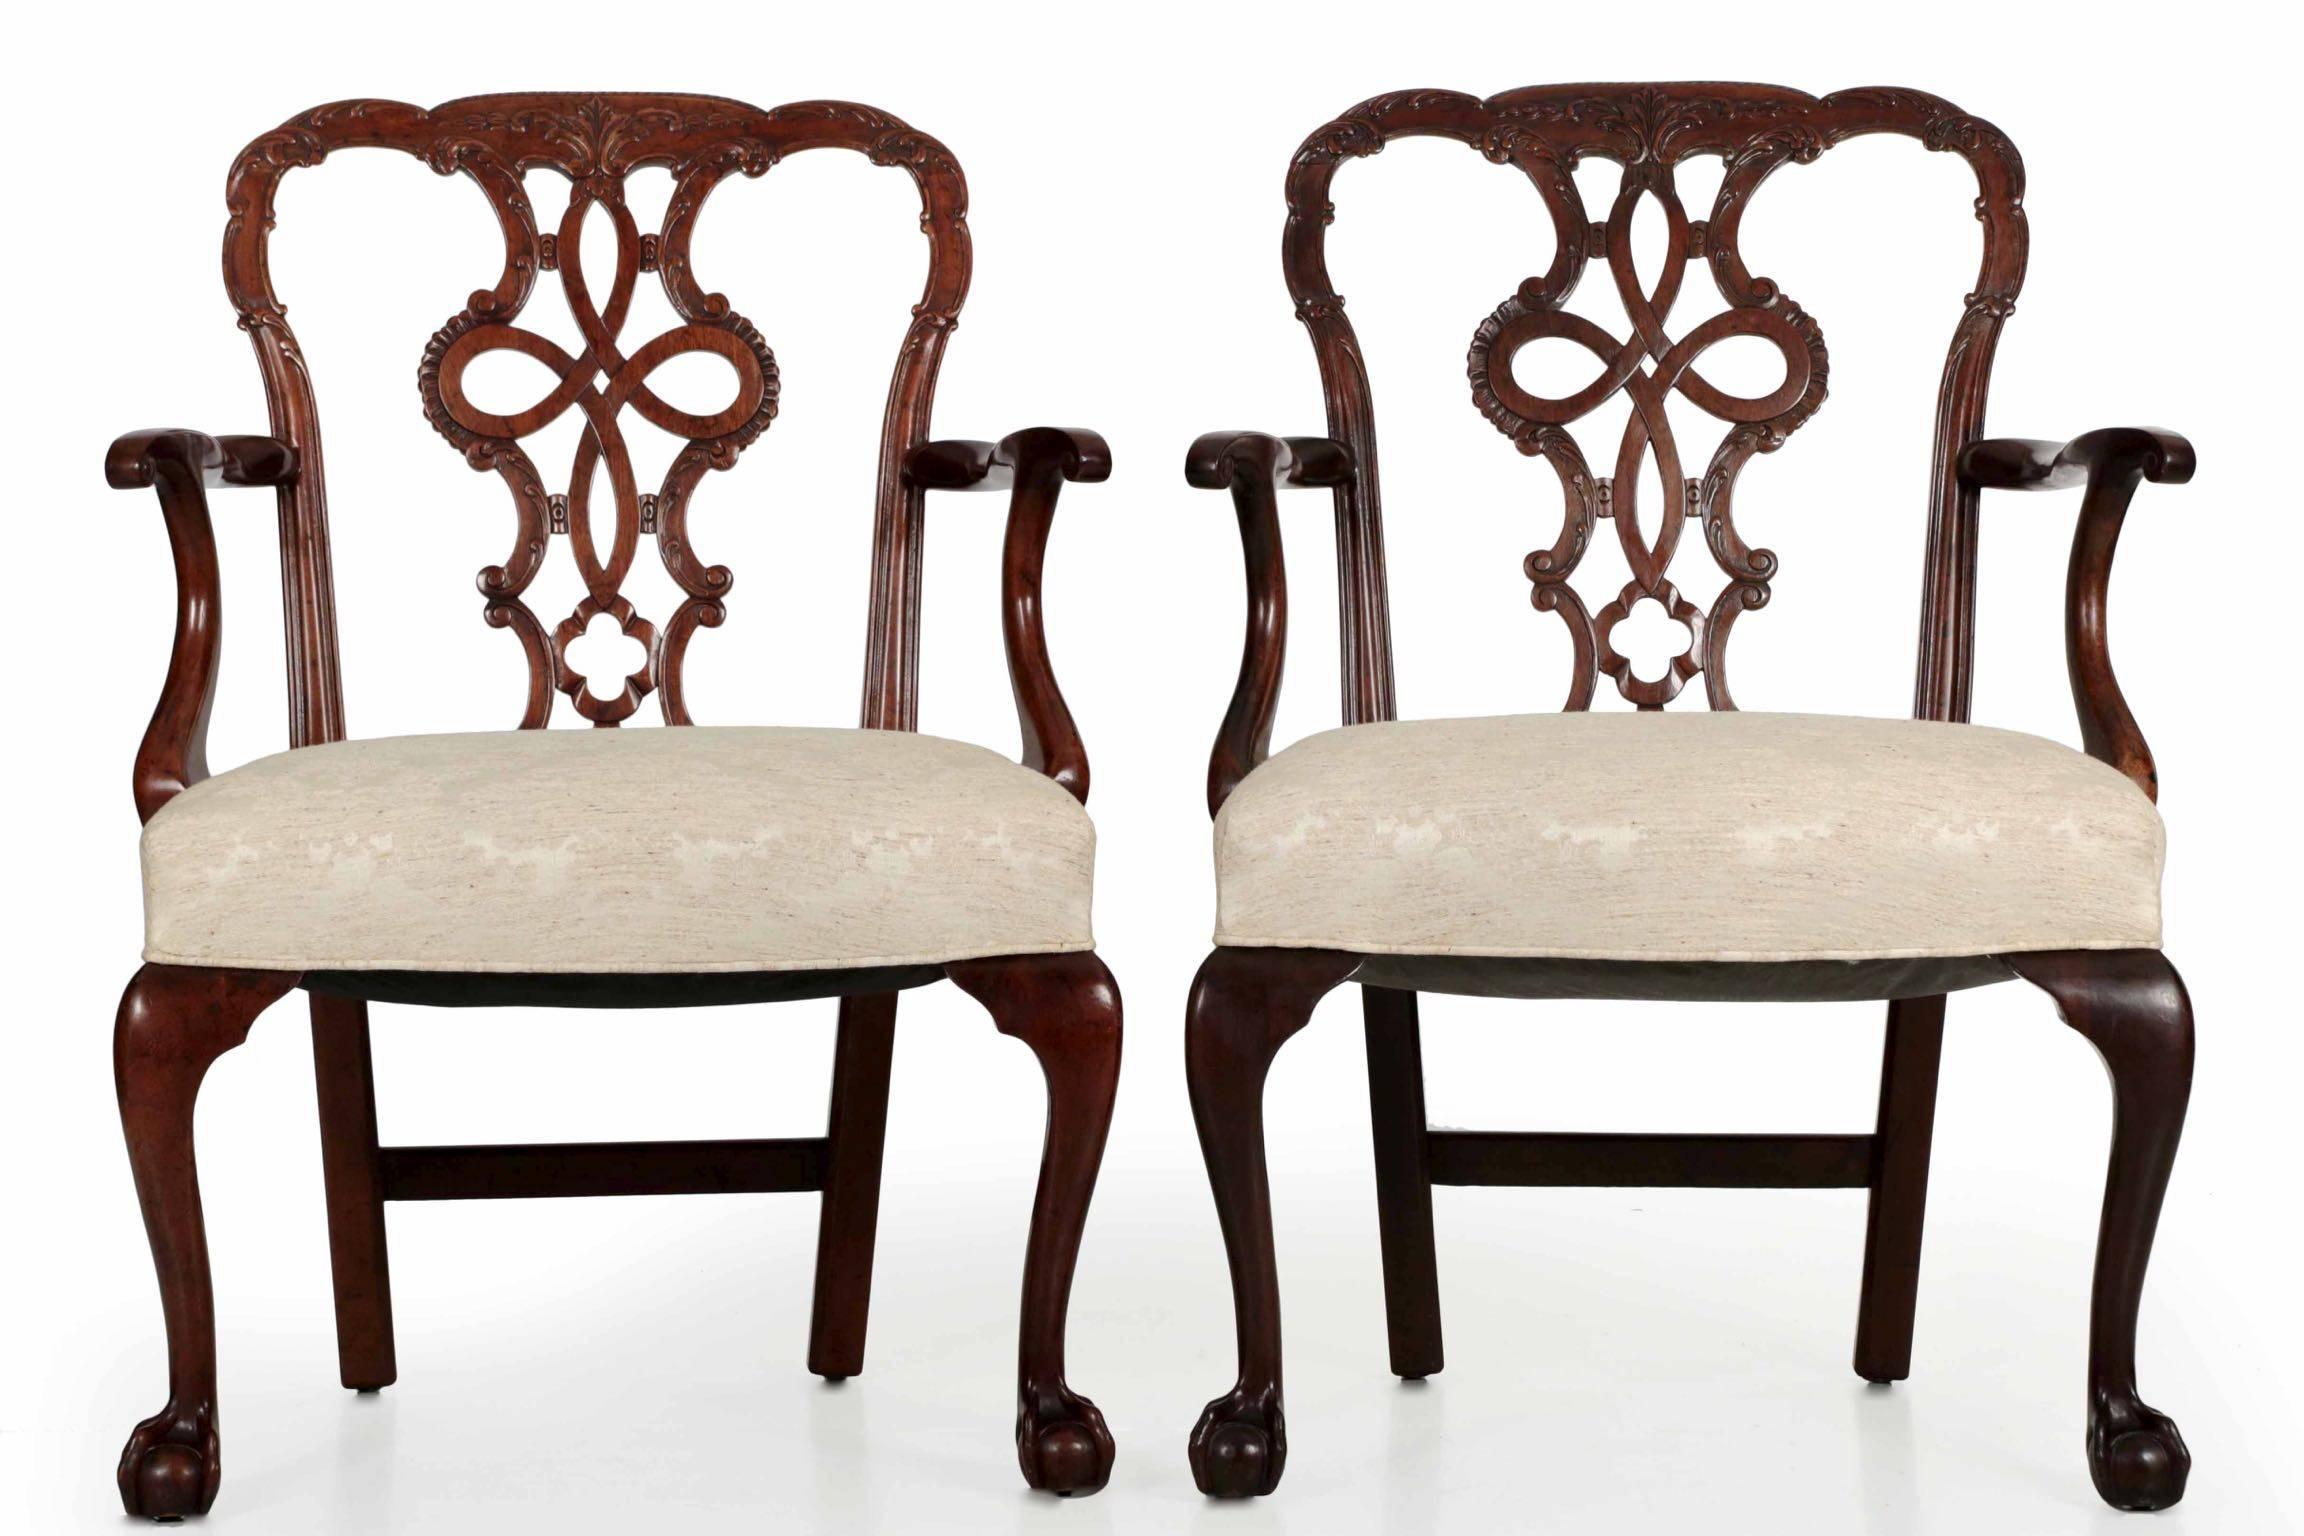 A very finely carved set of ten dining chairs in the Chippendale taste, they are crafted of a dense and beautifully figured mahogany with very fine craftsmanship throughout. The pierced splats exhibit the distinctive Rococo motif borrowed from the